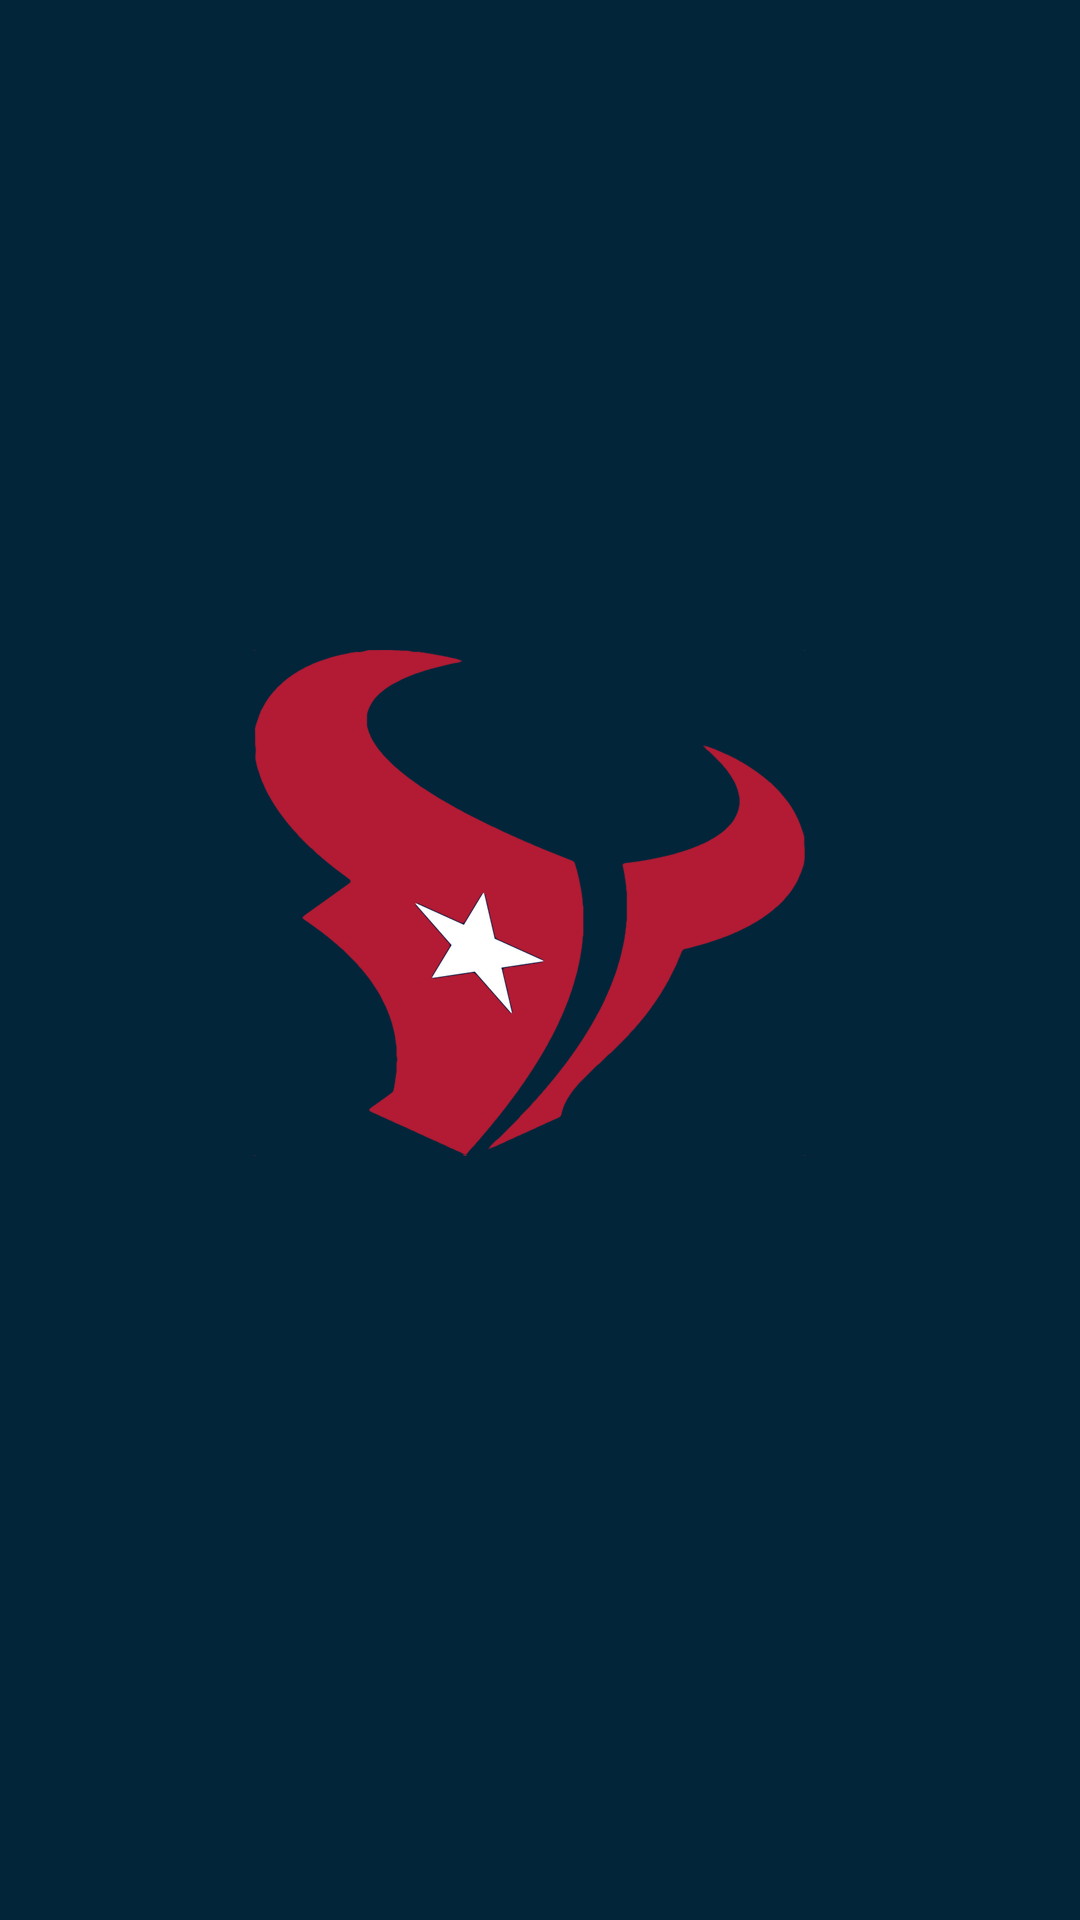 Screensaver iPhone Houston Texans with high-resolution 1080x1920 pixel. Donwload and set as wallpaper for your iPhone X, iPhone XS home screen backgrounds, XS Max, XR, iPhone8 lock screen wallpaper, iPhone 7, 6, SE and other mobile devices